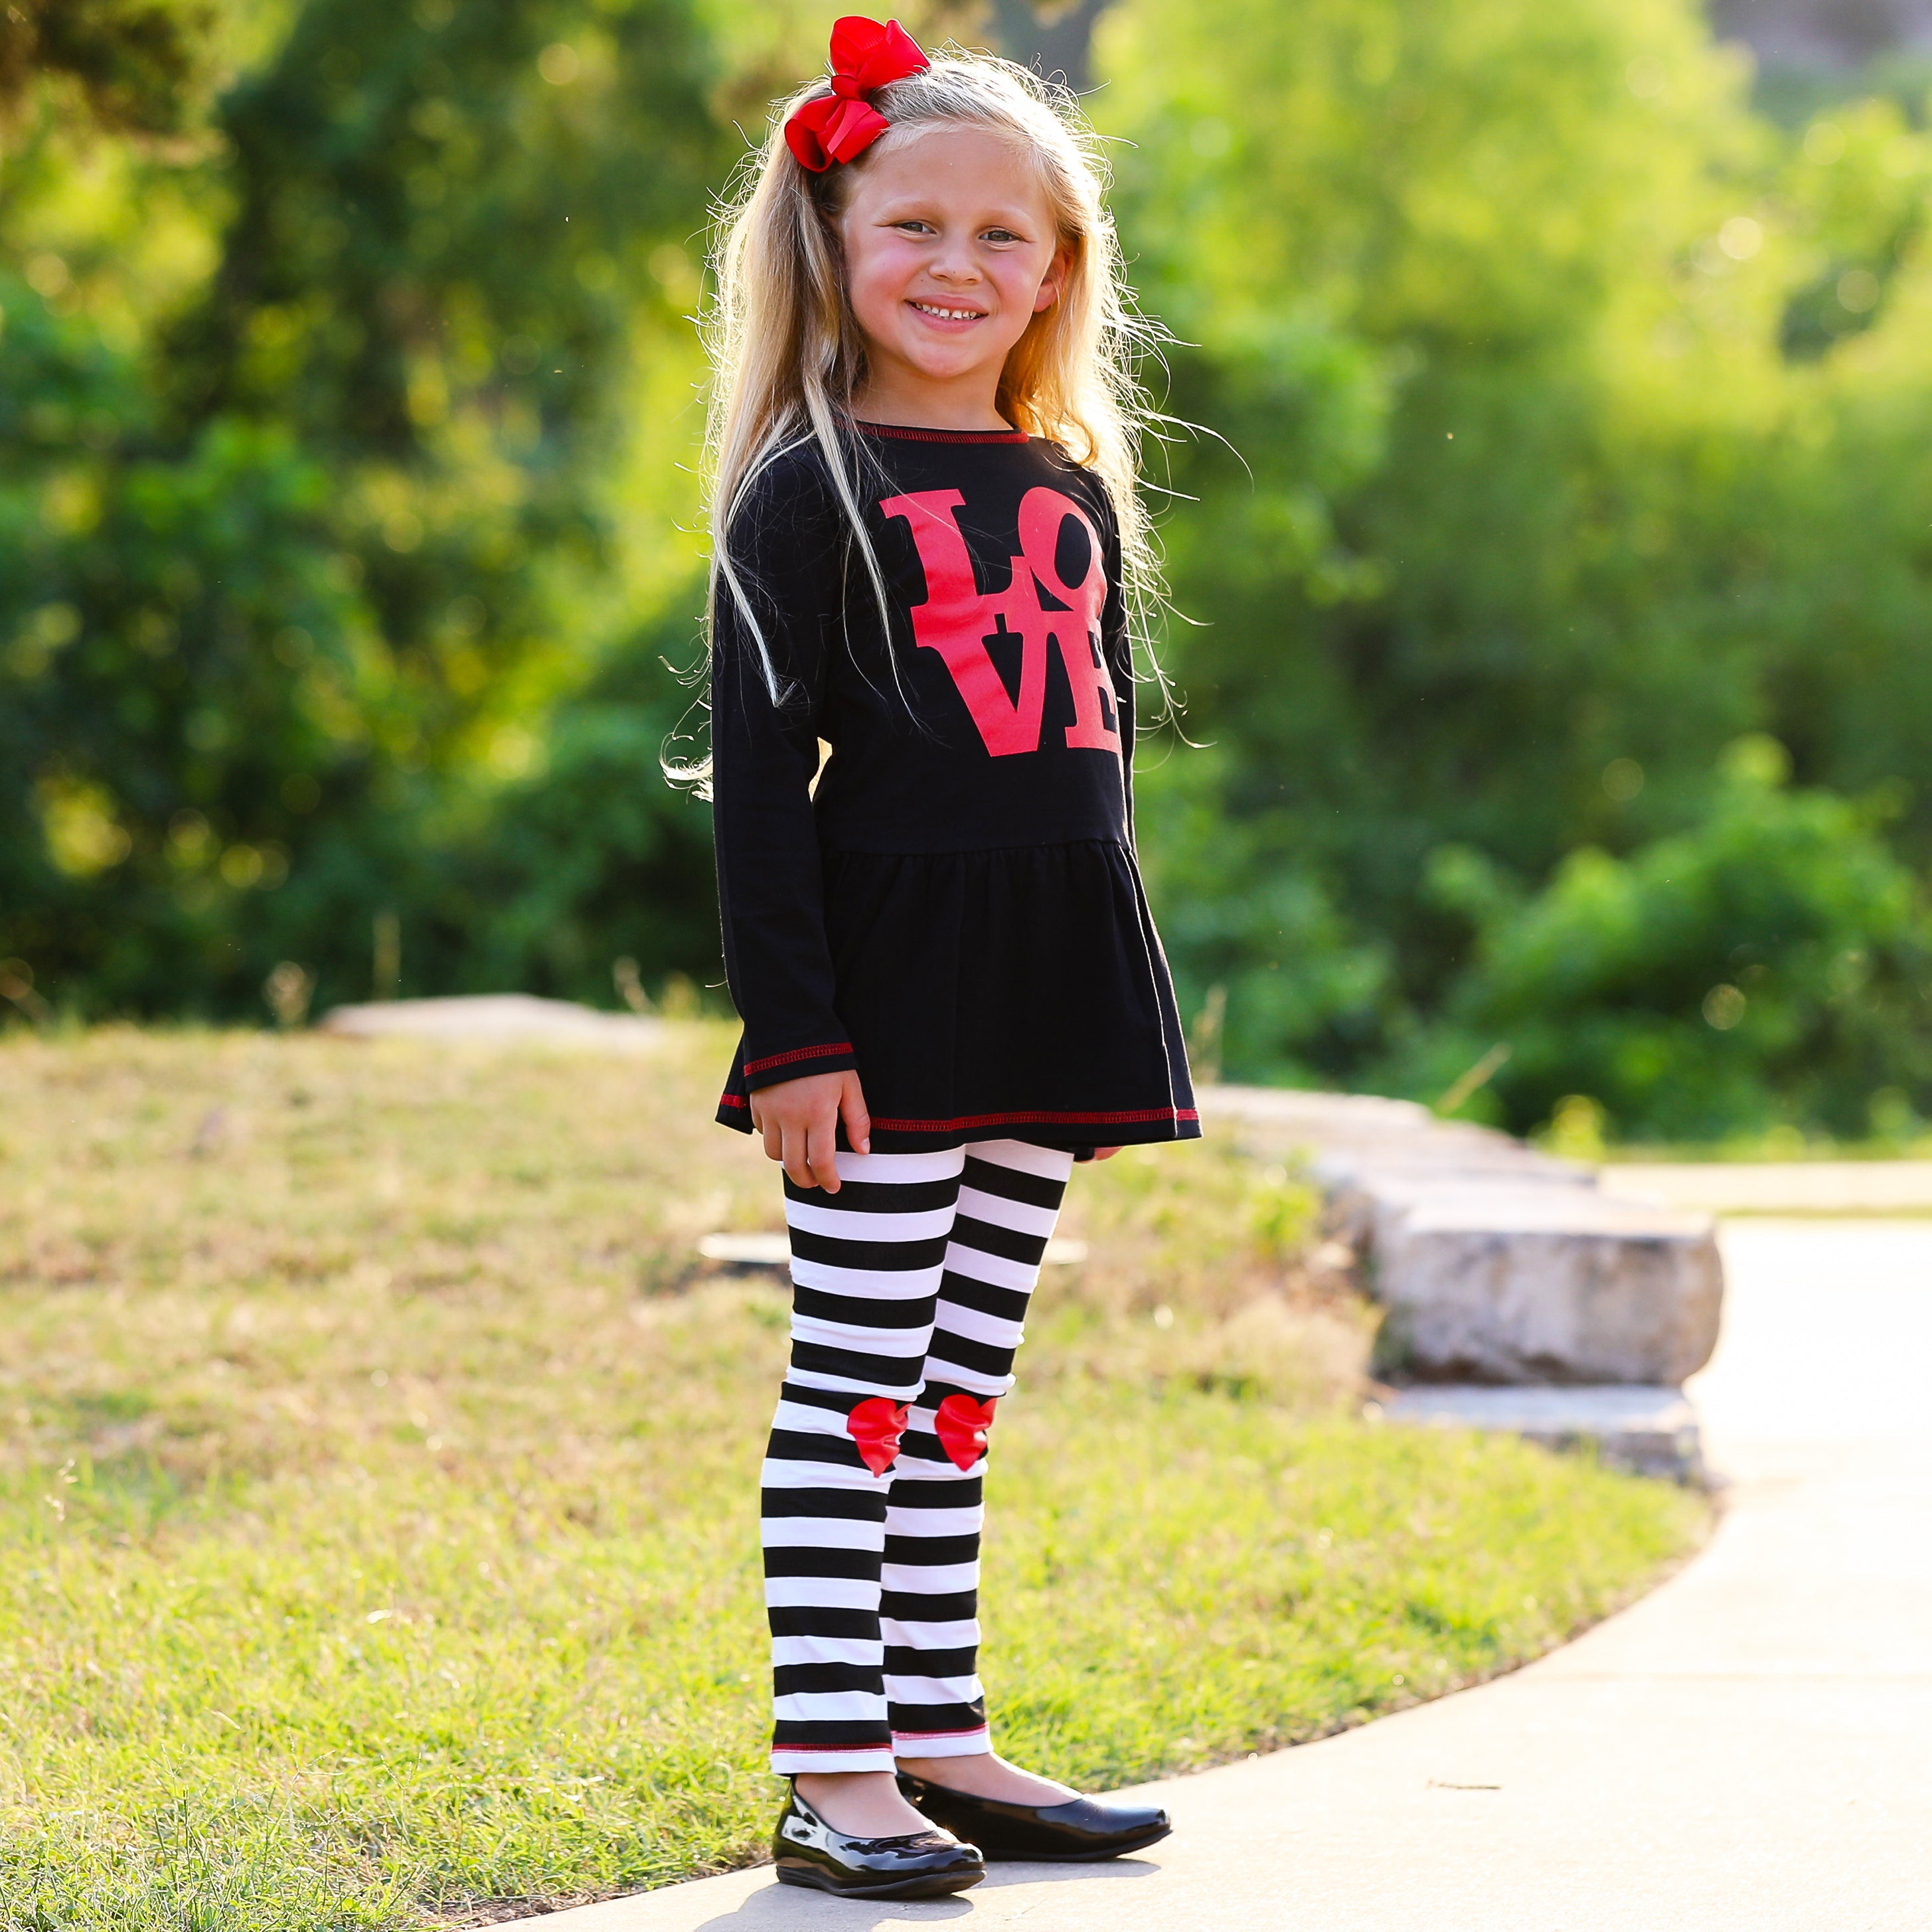 Girls Winter LOVE Heart Holiday Dress Tunic & Leggings Set Outfit